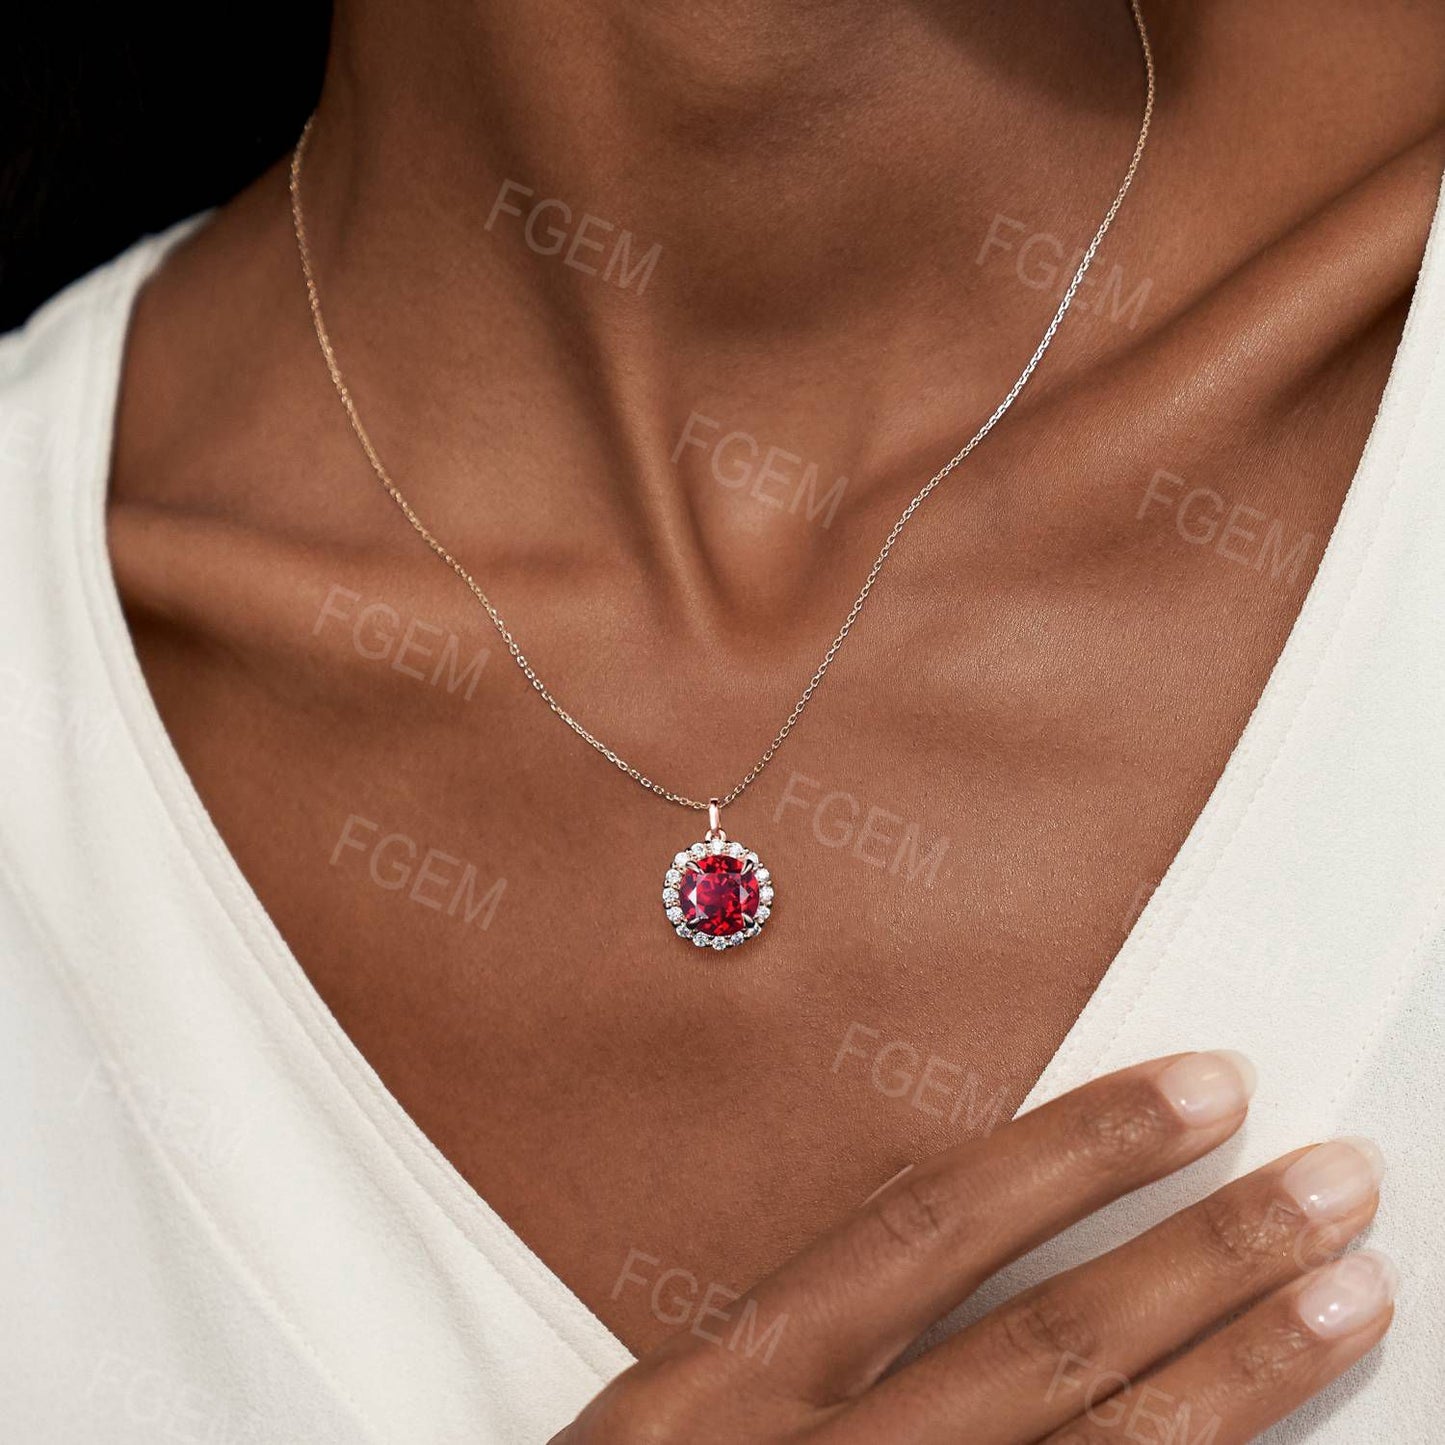 6.5mm Round Ruby Chain Necklace Rose Gold Moissanite Diamond Pendant Vintage Red Gemstone Halo Wedding Necklace July Birthstone Promise Gift